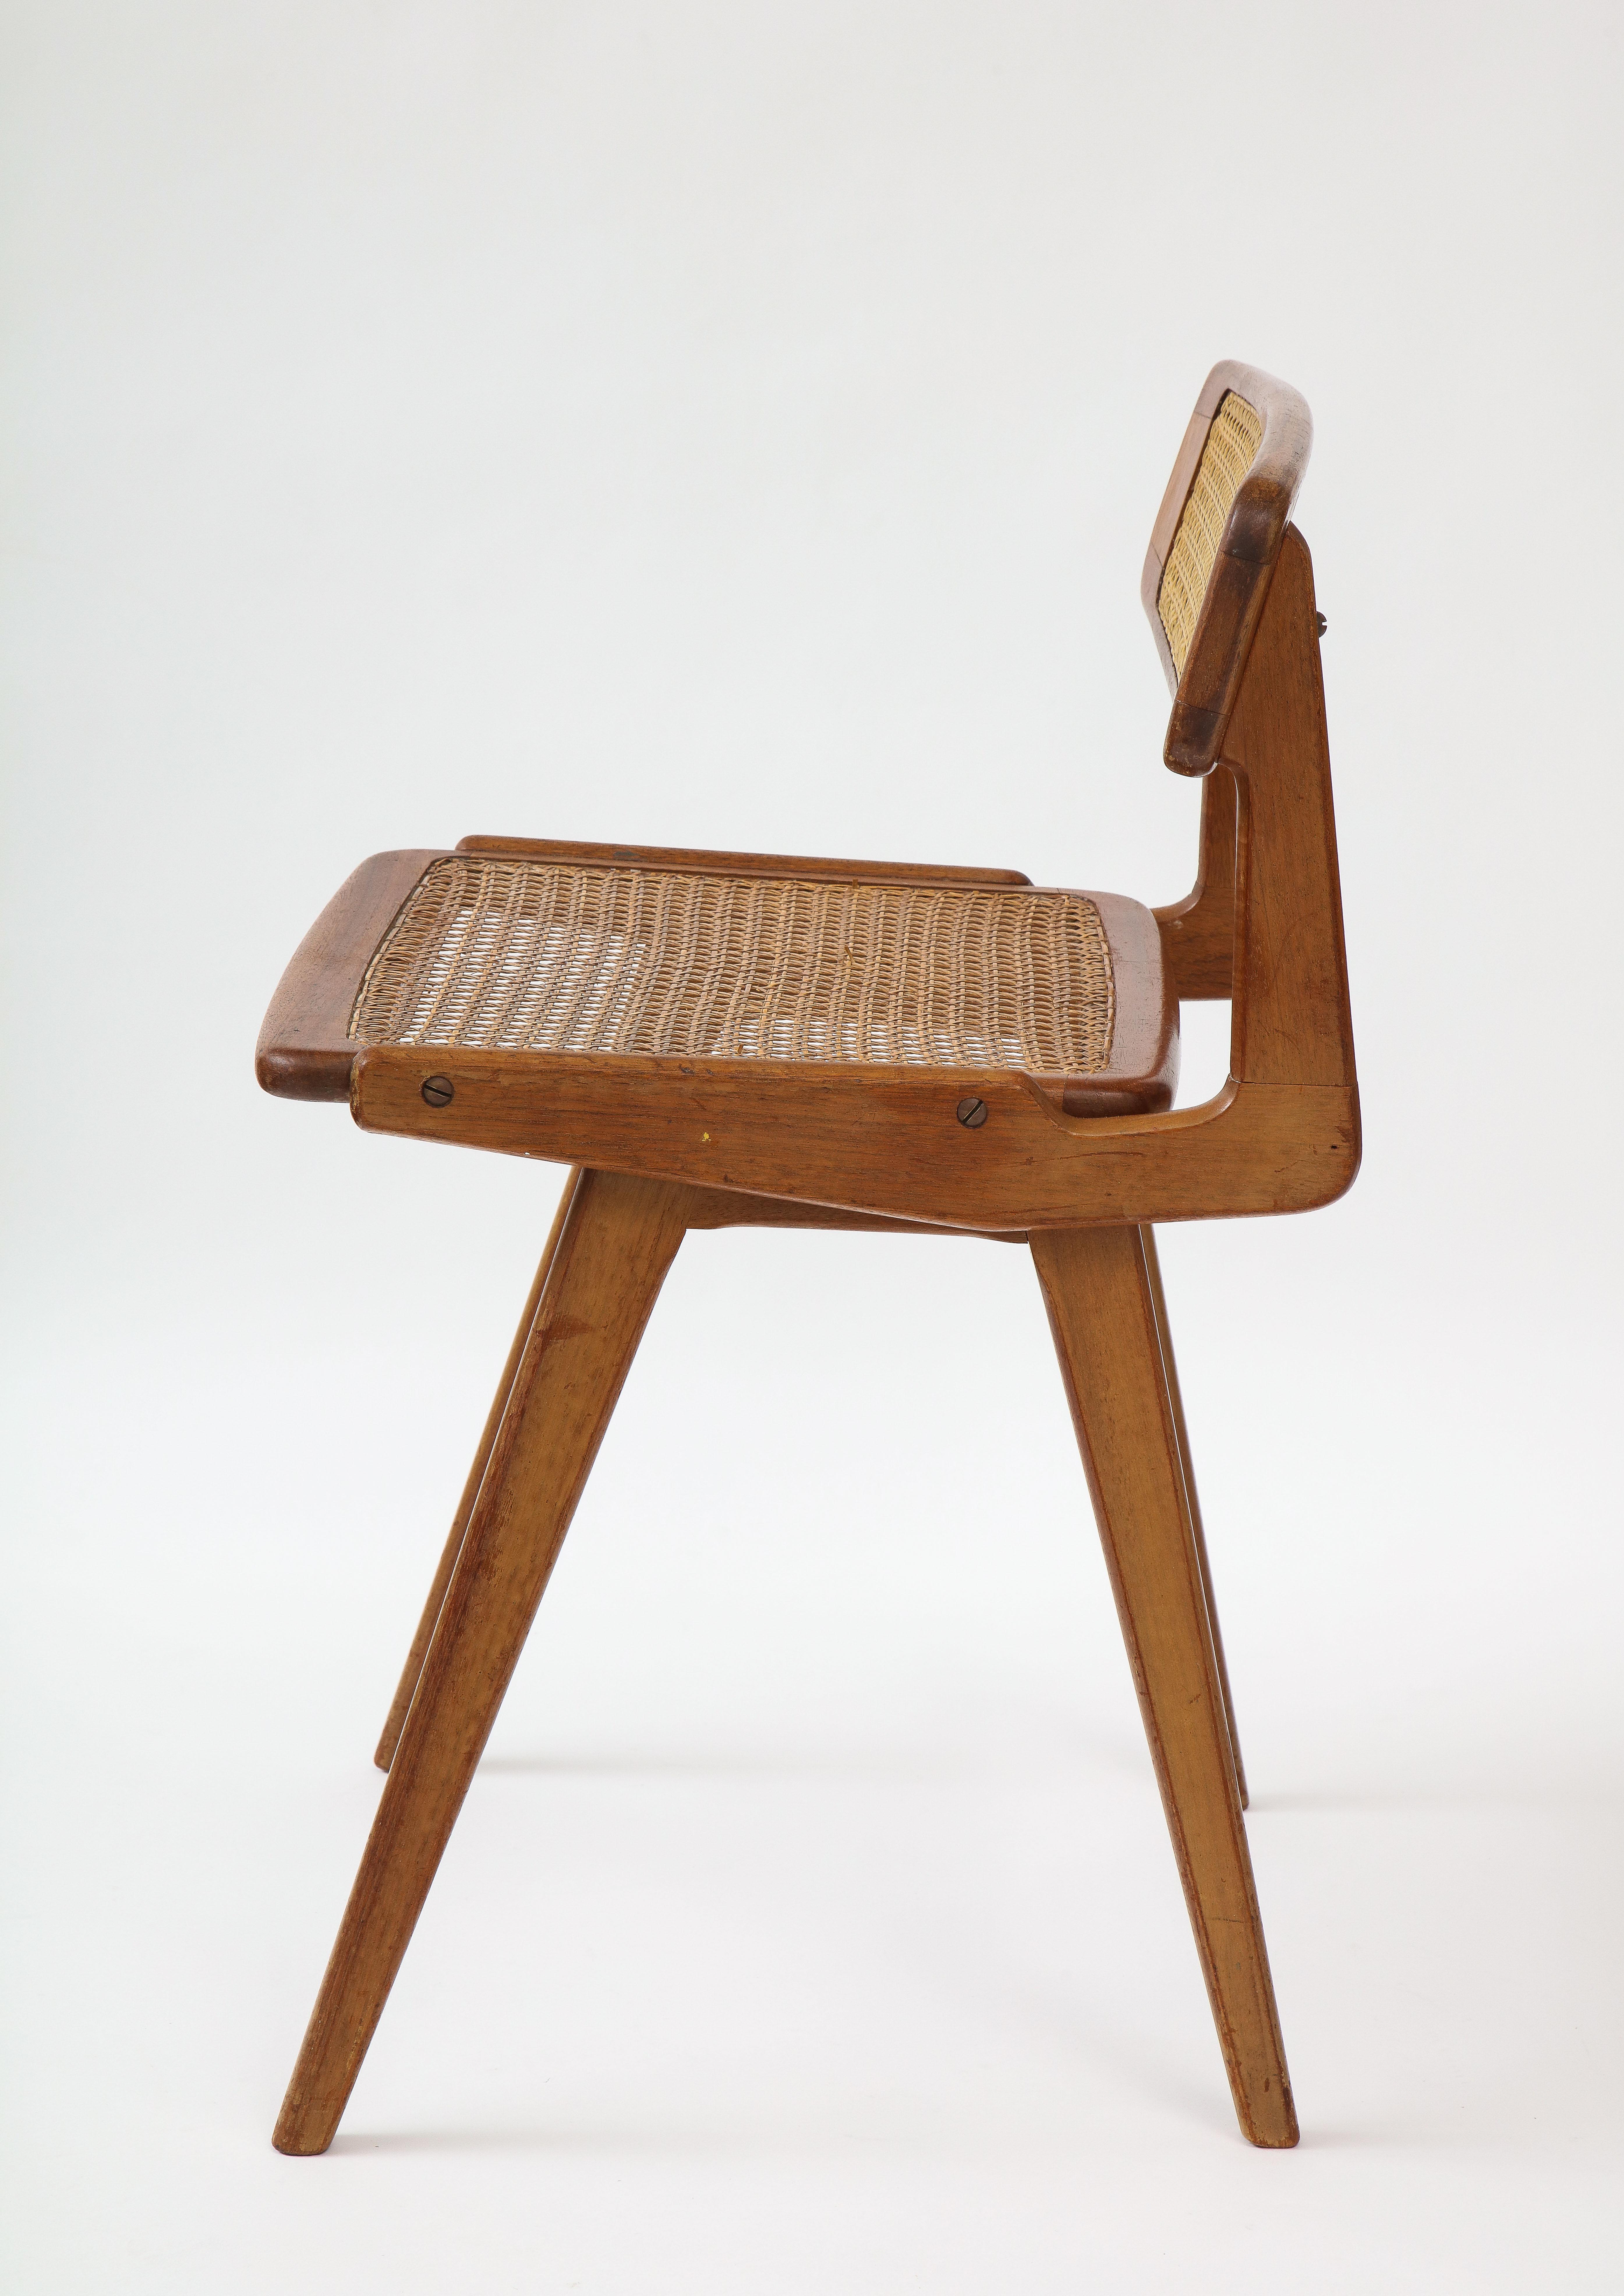 French Michel Ducaroy, Chair No. 628, SNA Roset, France, 1961